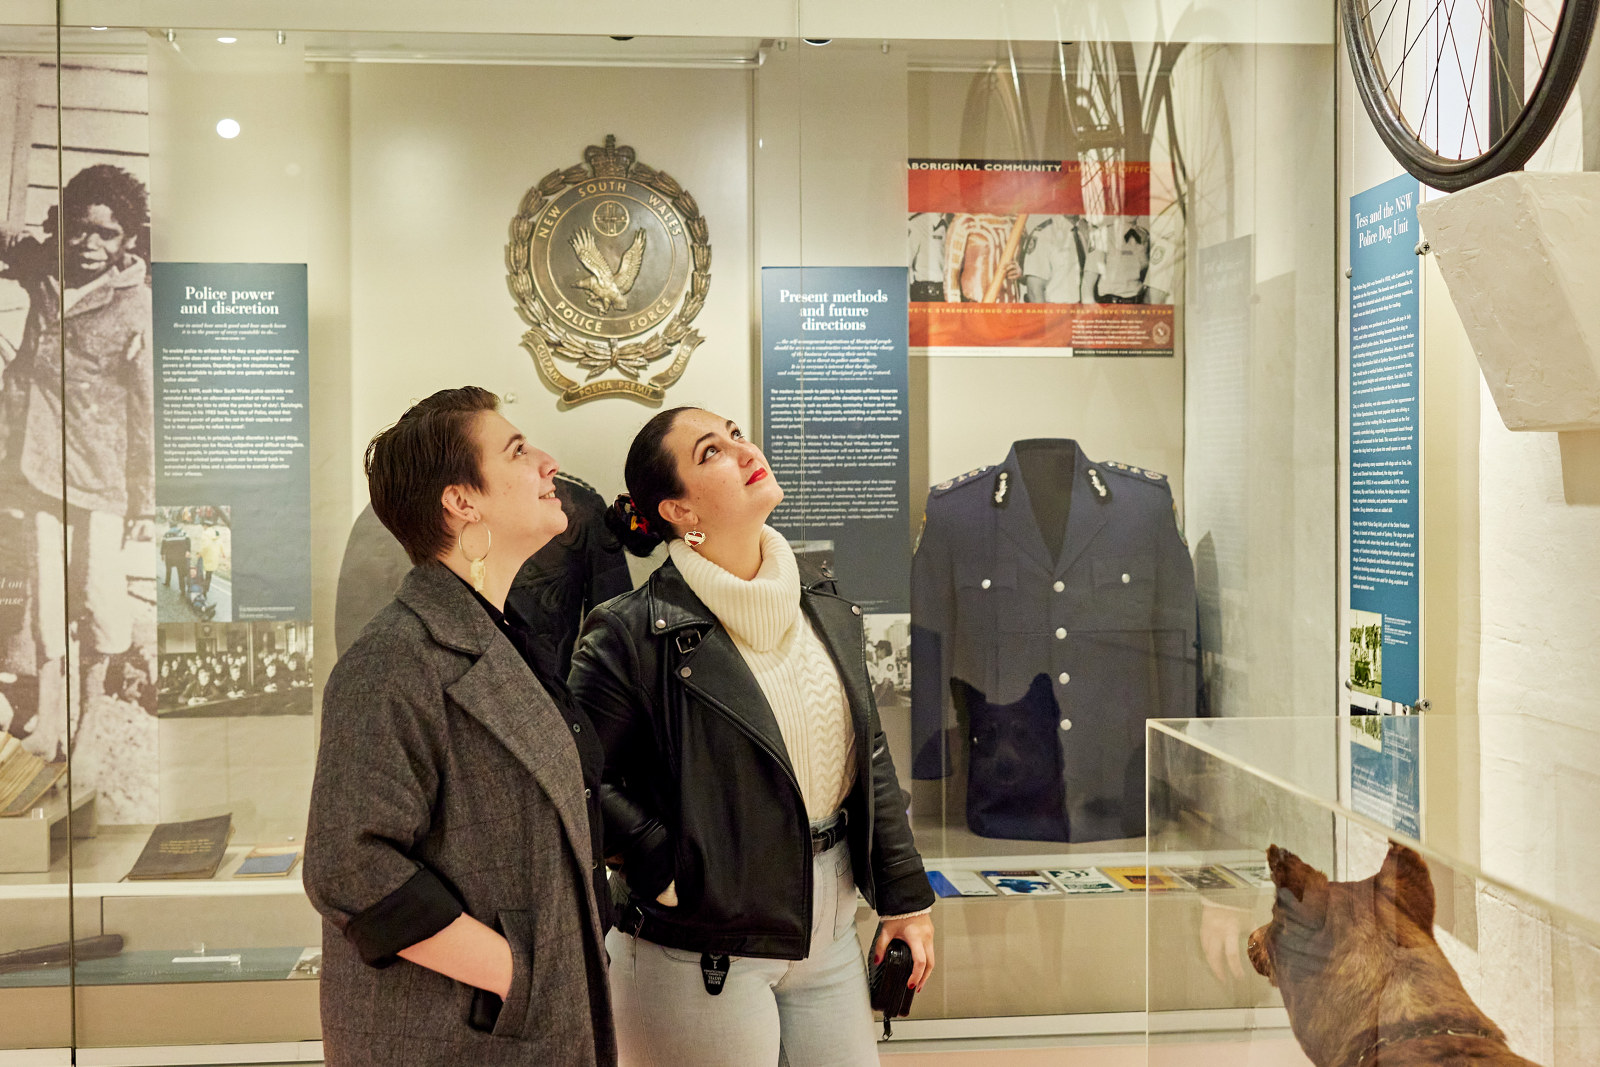 Two visitors look at the interpretation panels and objects within the cells of the museum.